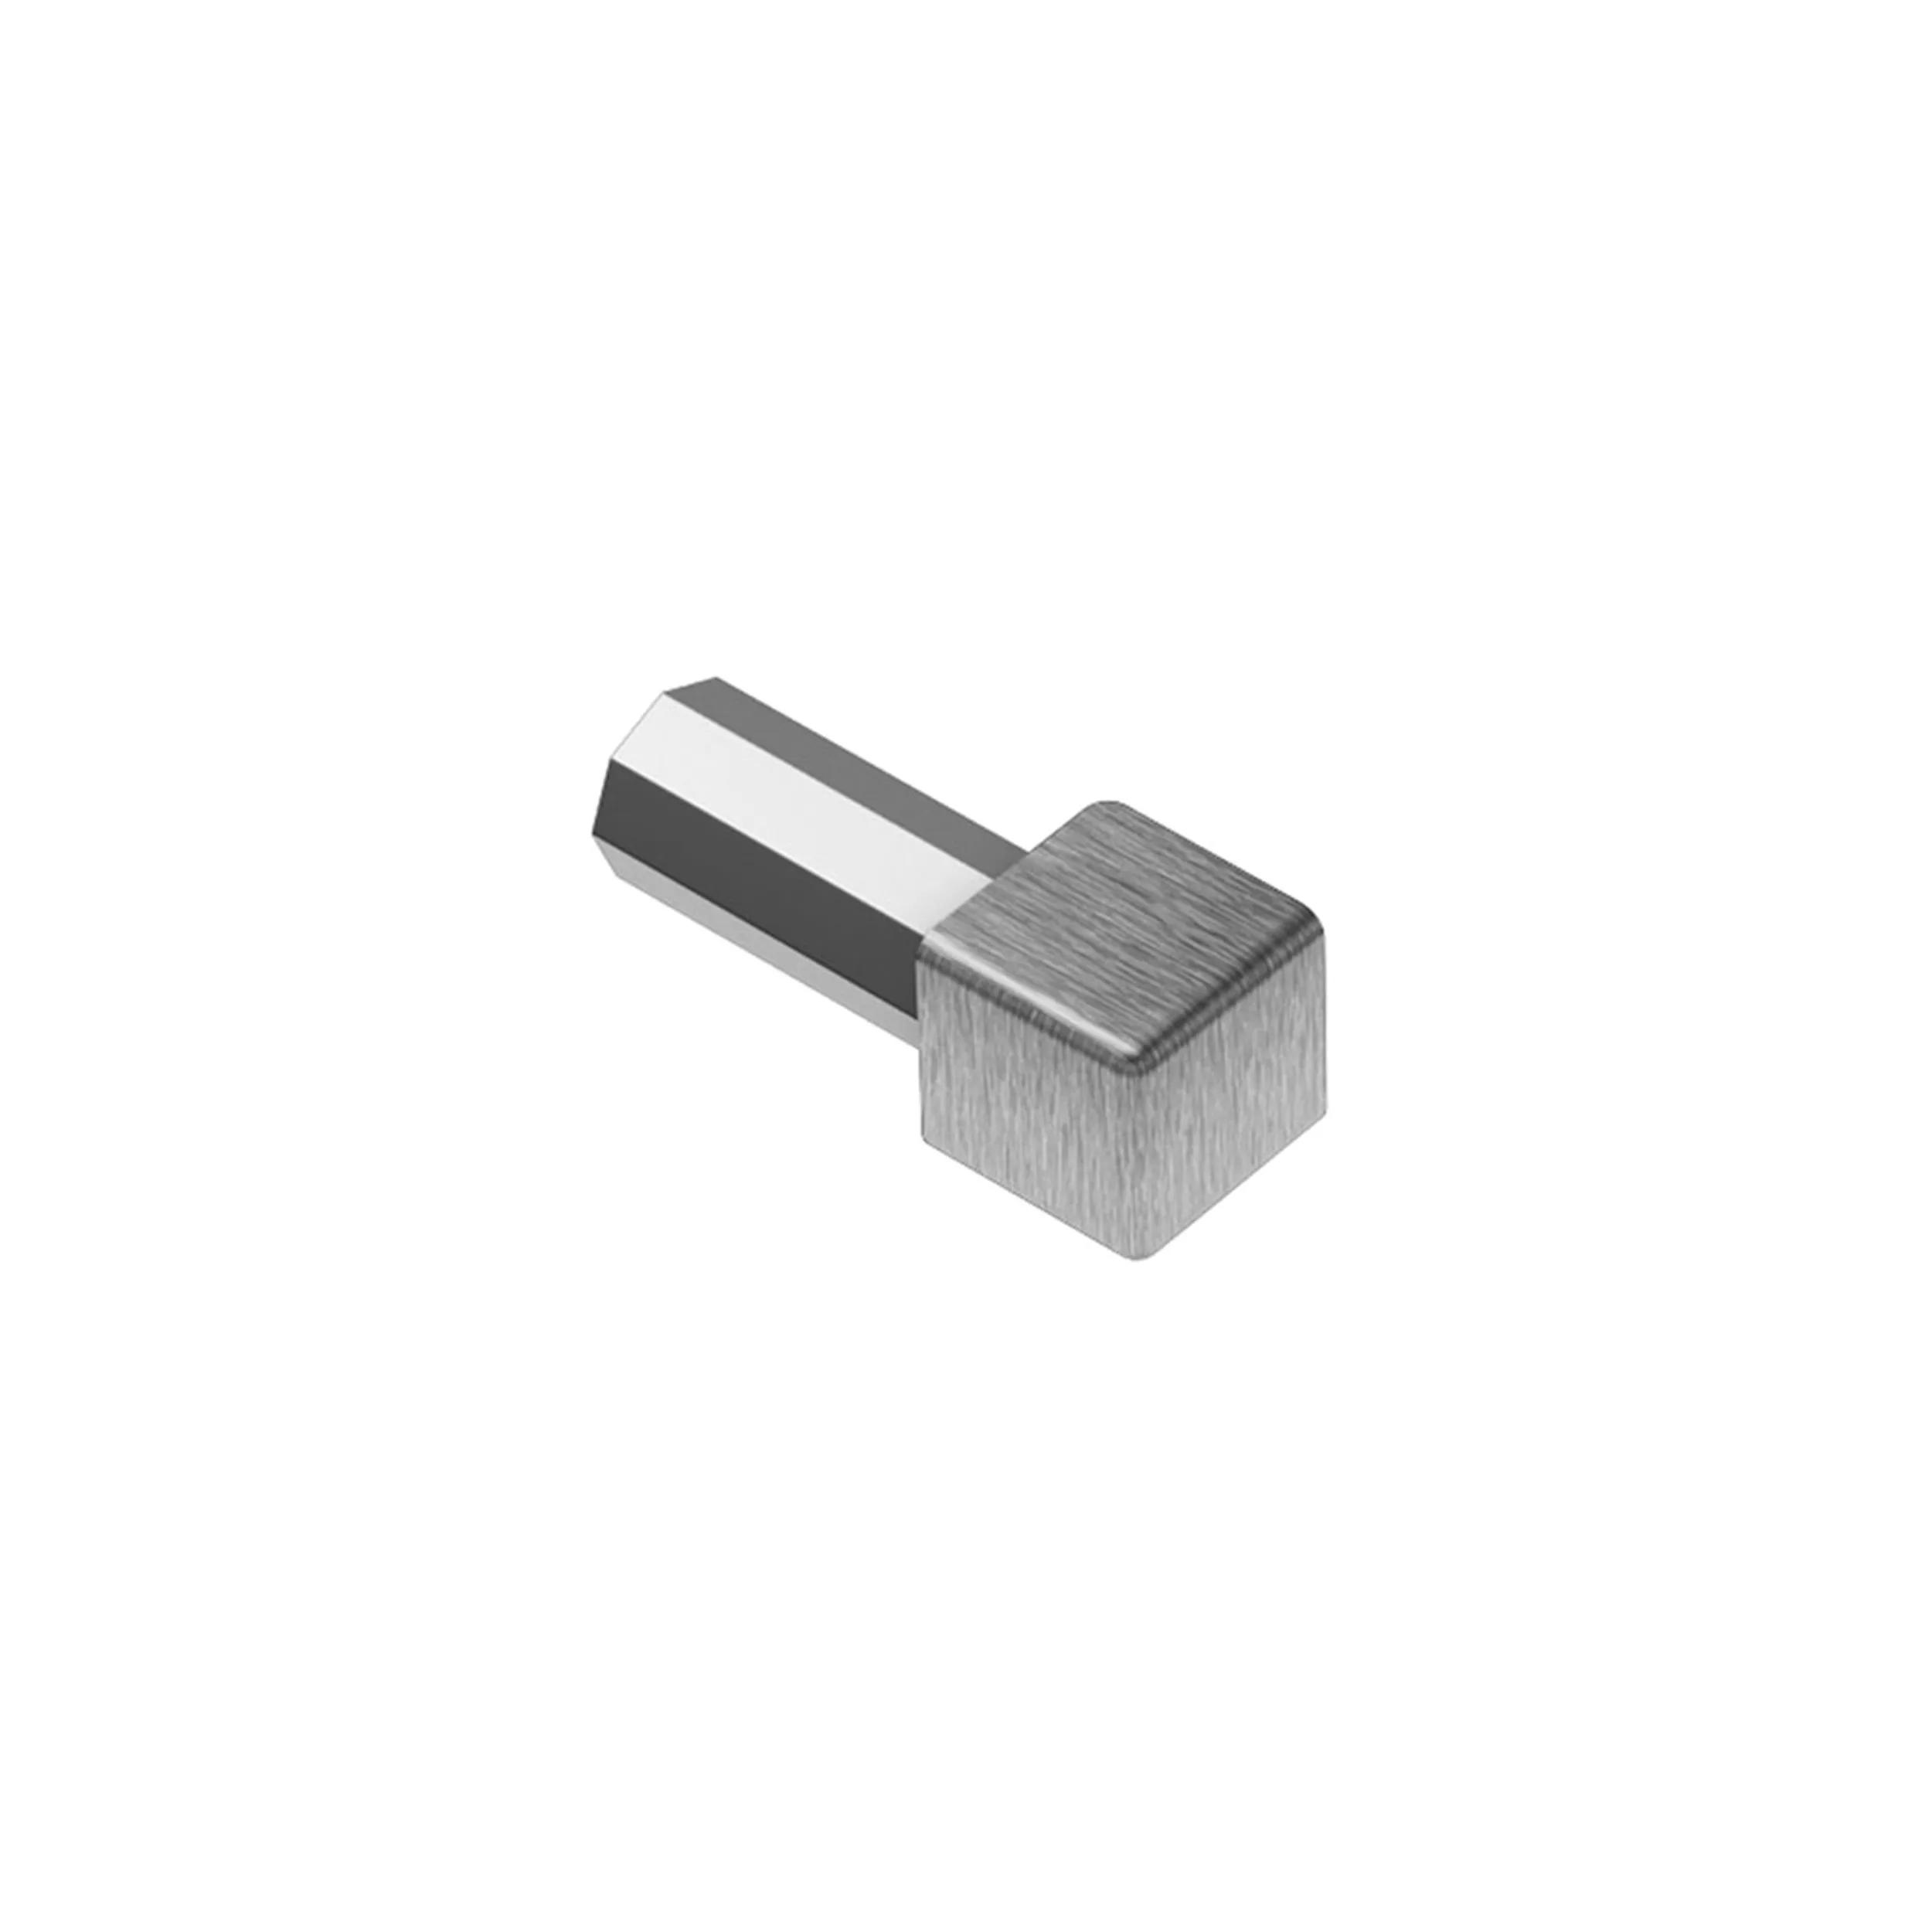 Schluter Quadec In/Out Corner 9/32 Brush Stainless Steel